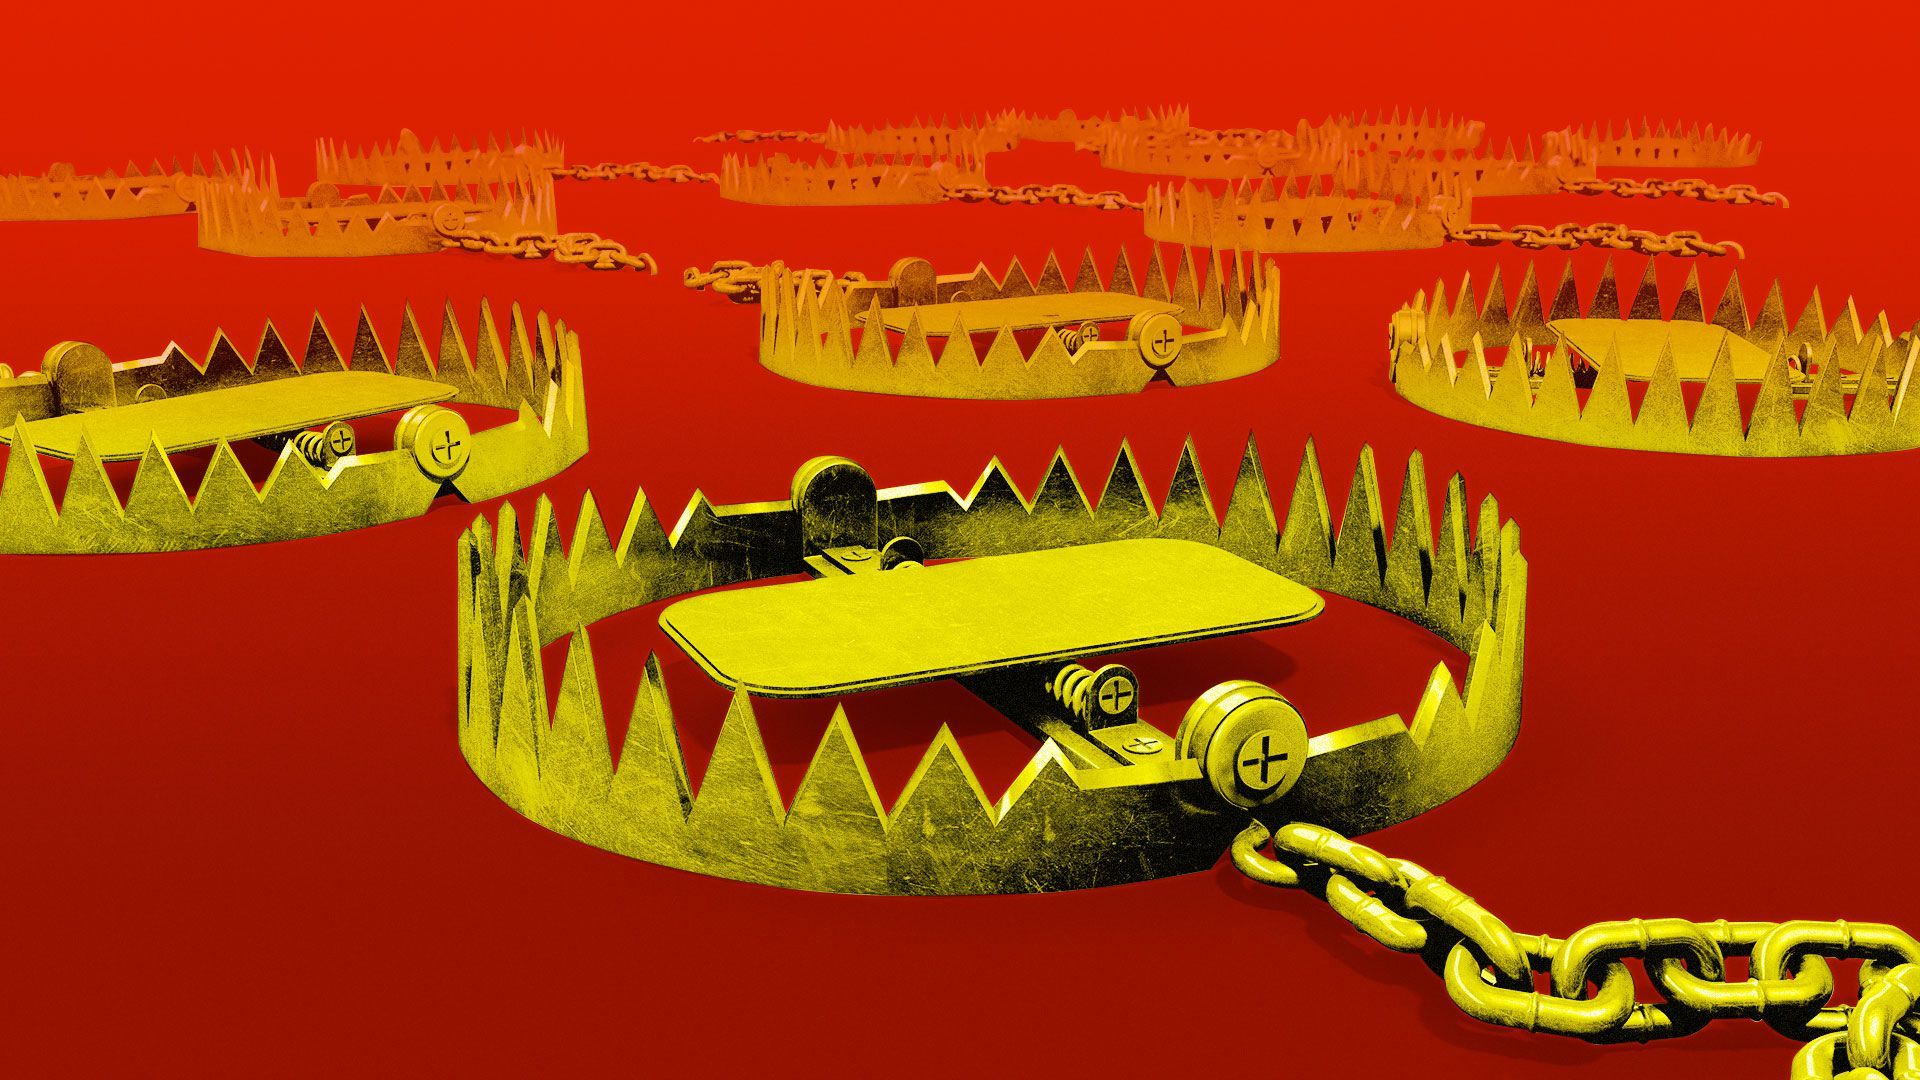 Illustration of multiple yellow bear traps on a red field.